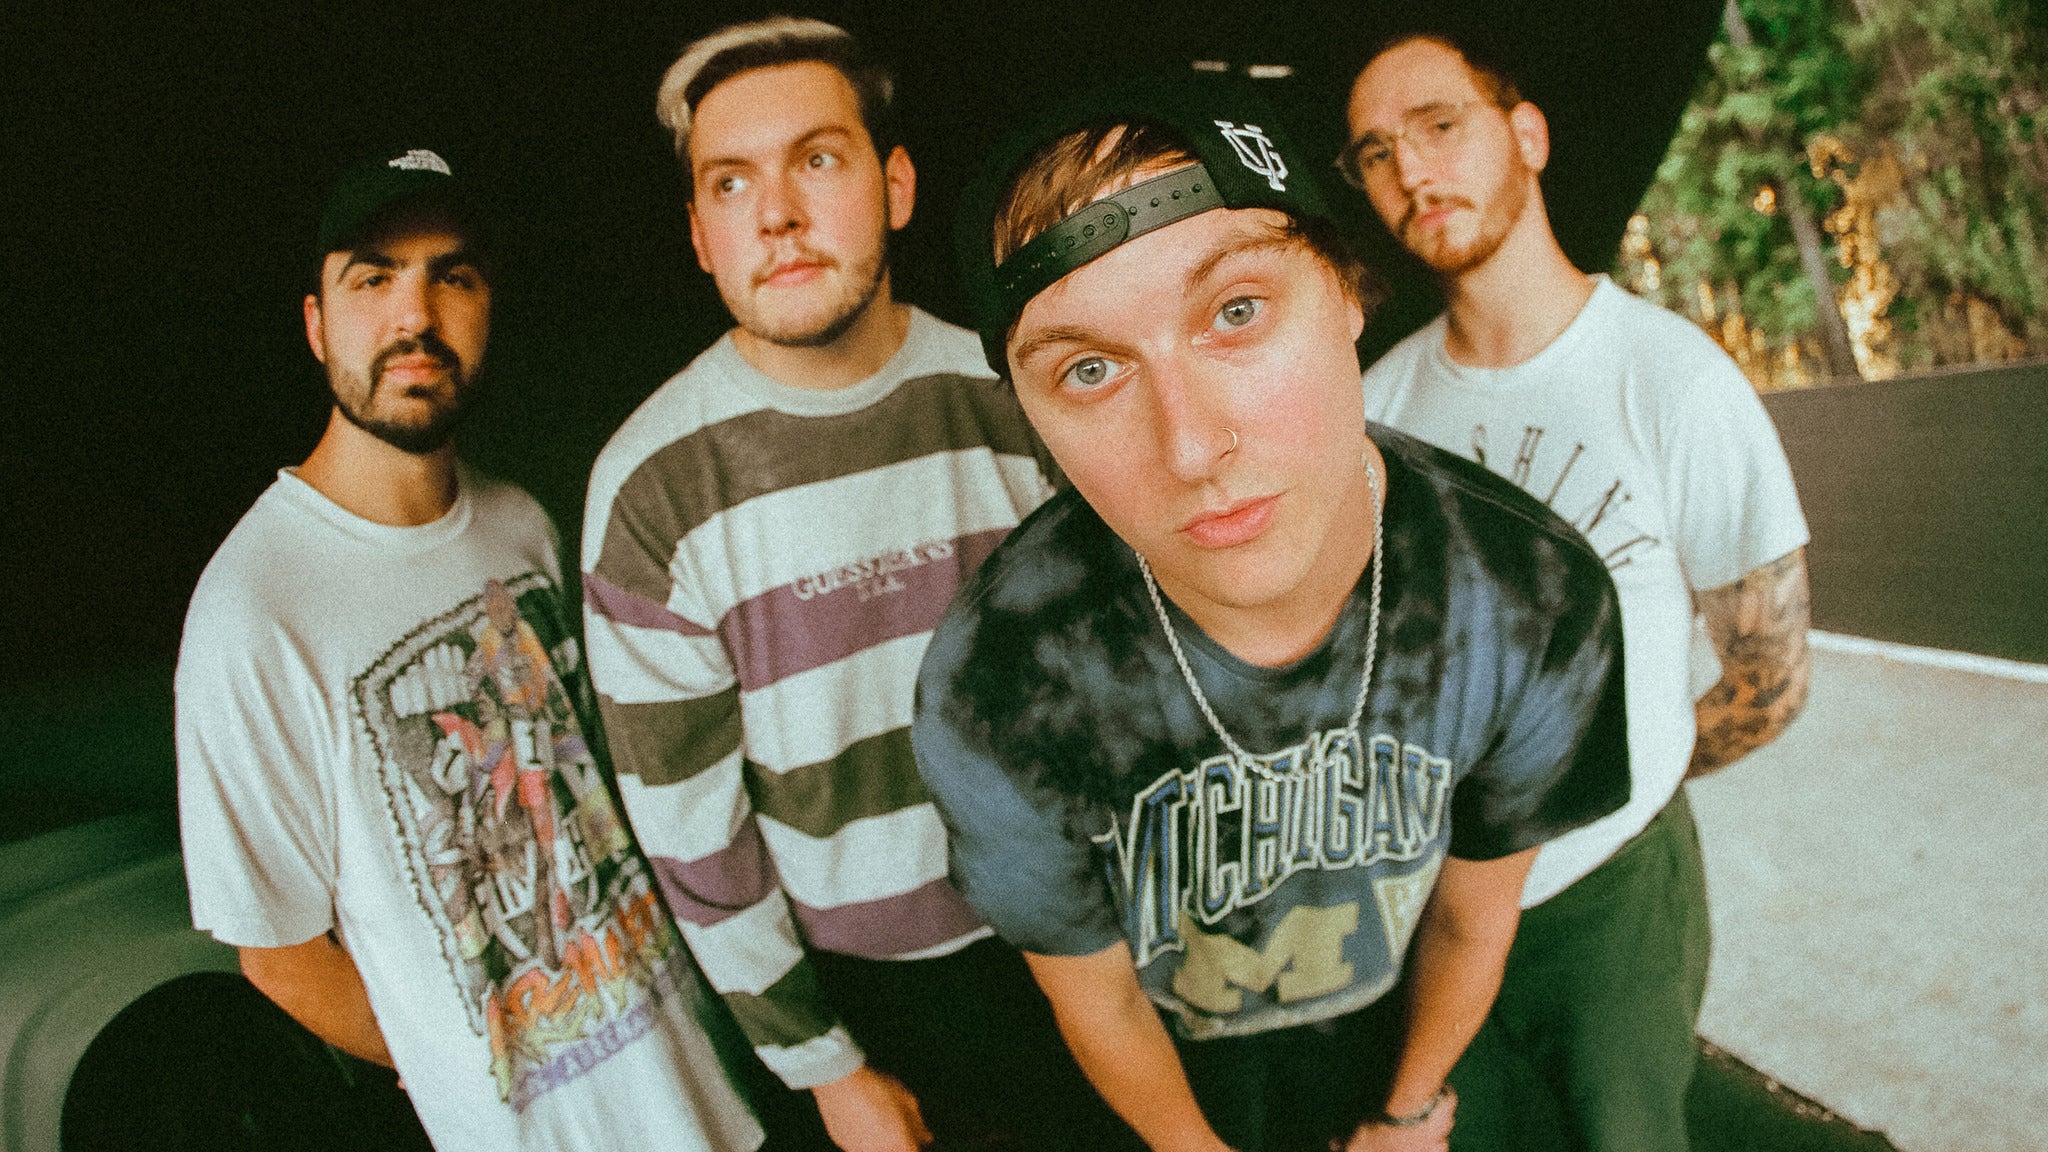 State Champs in Baltimore promo photo for Exclusive presale offer code